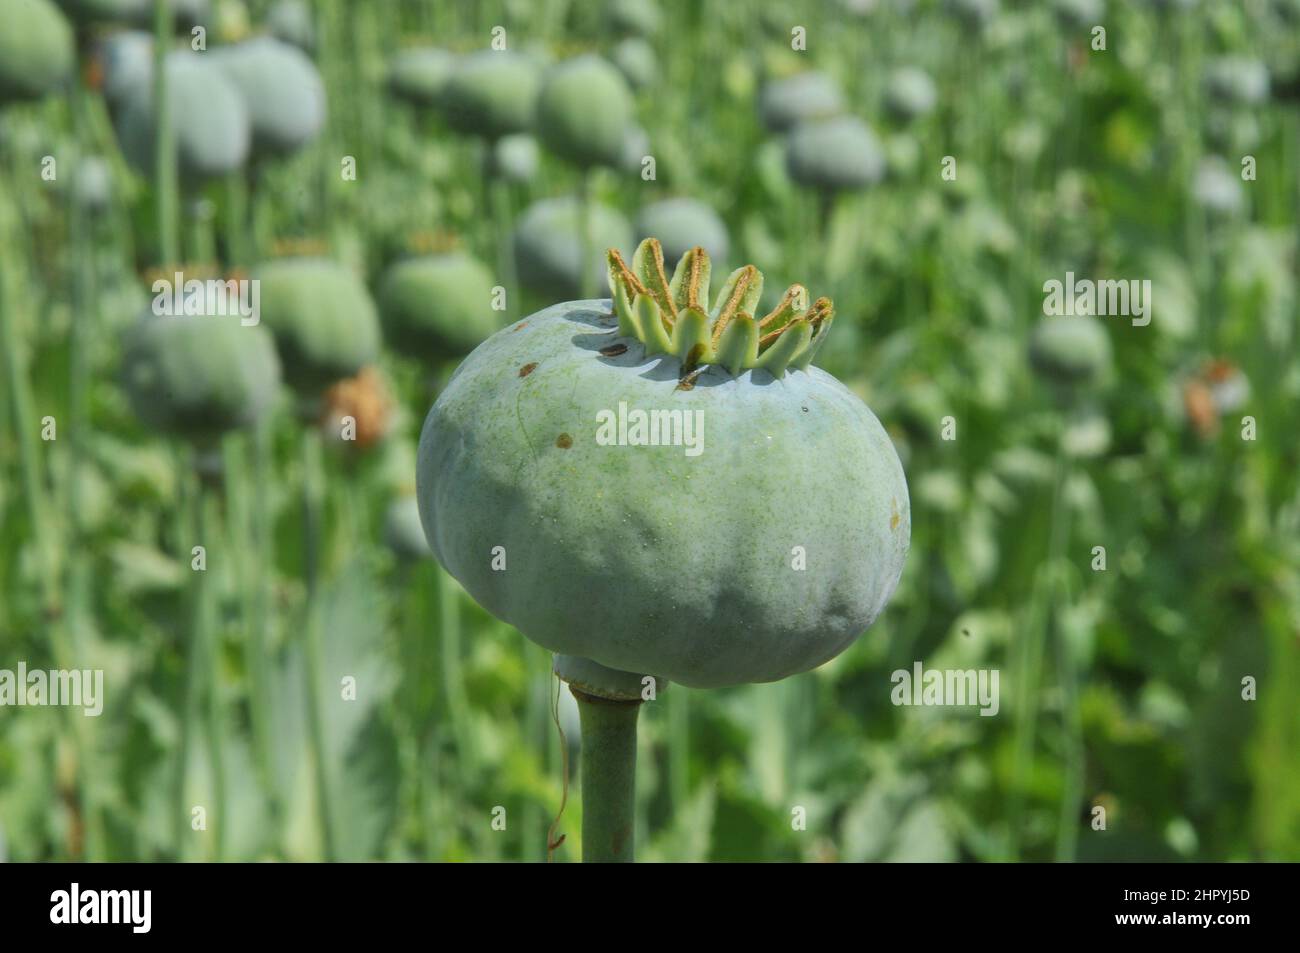 Heroin poppy photography and images - Alamy